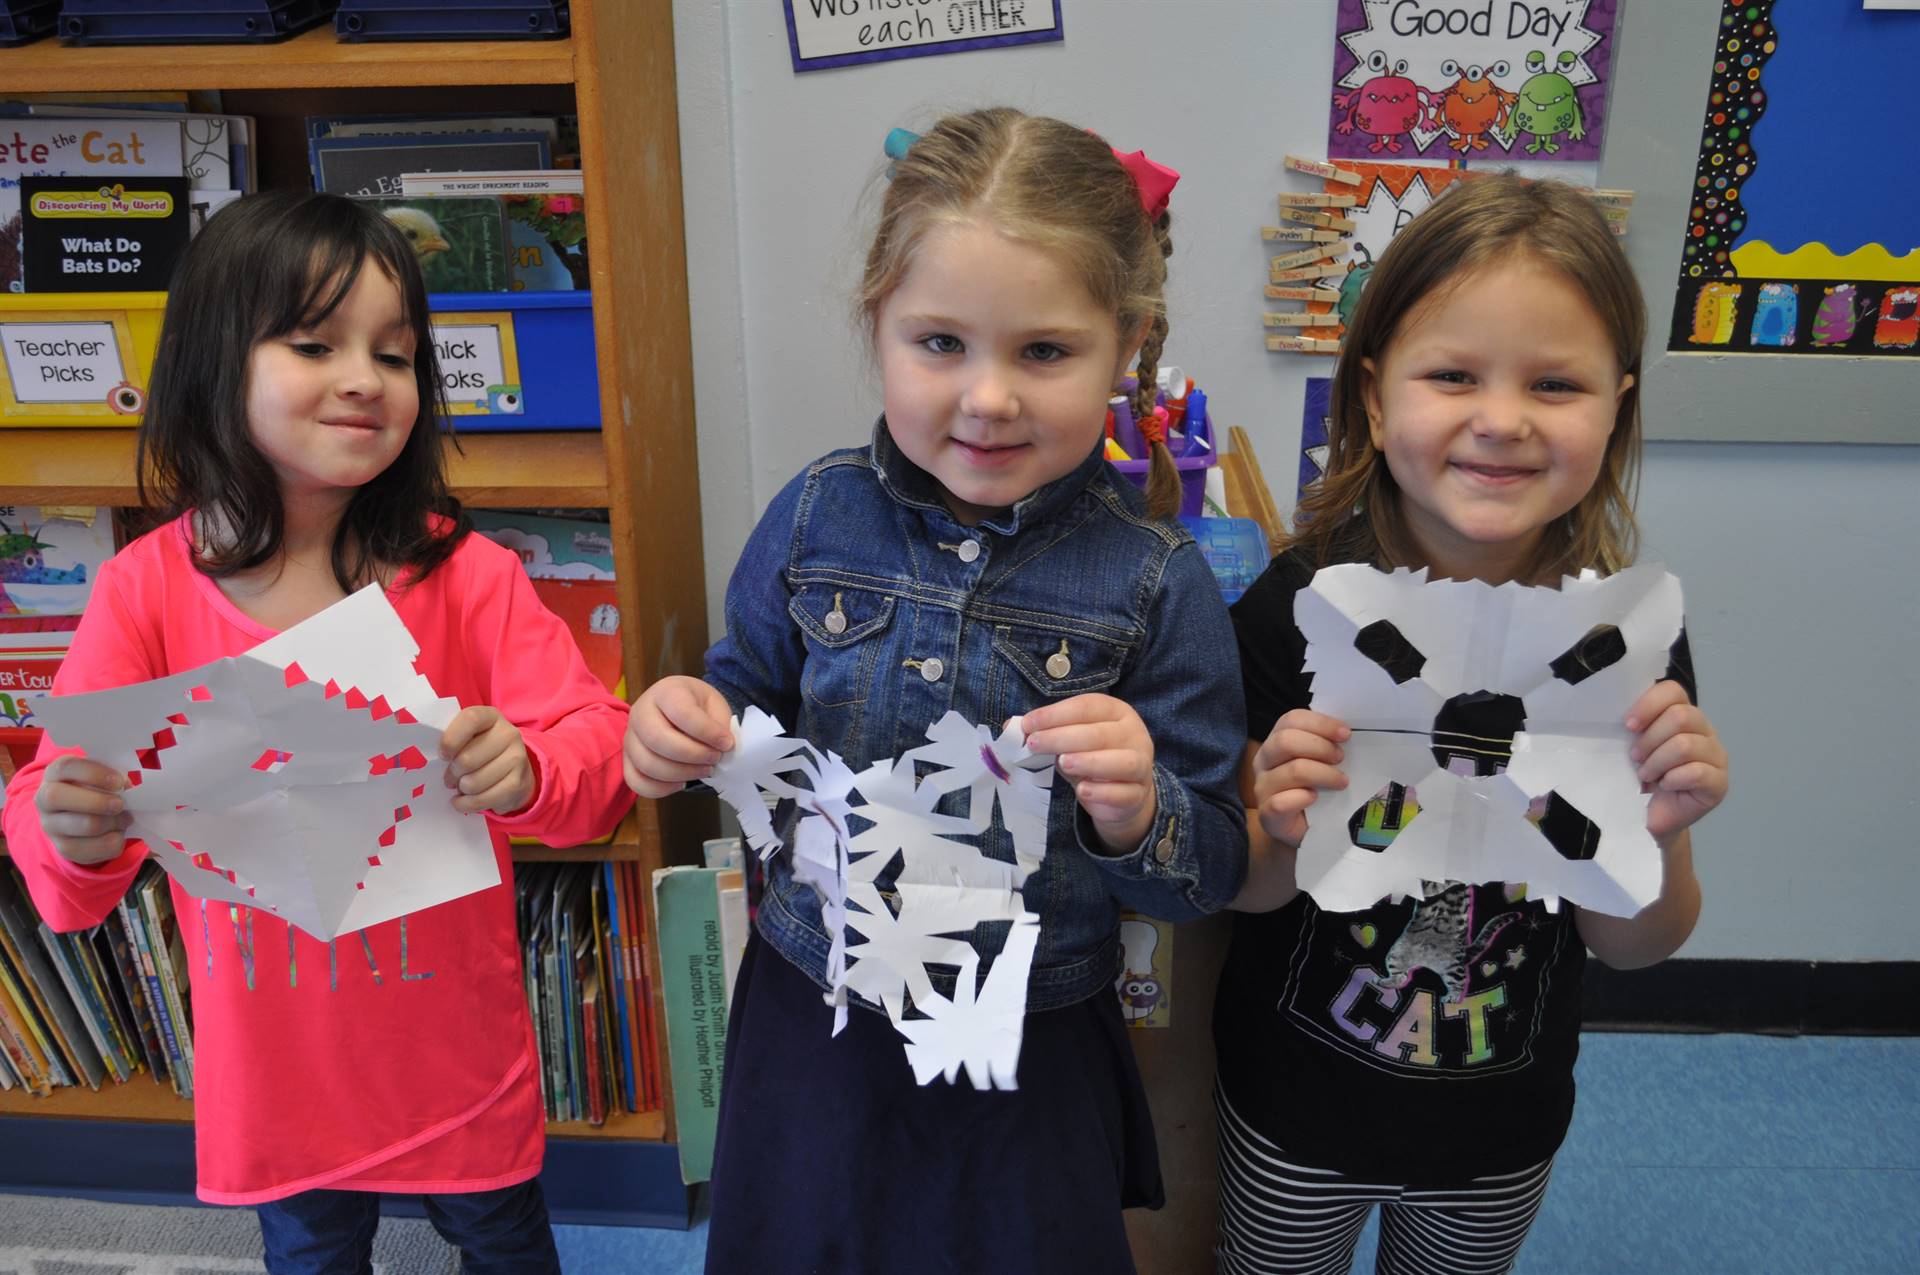 3 students show snowflakes.